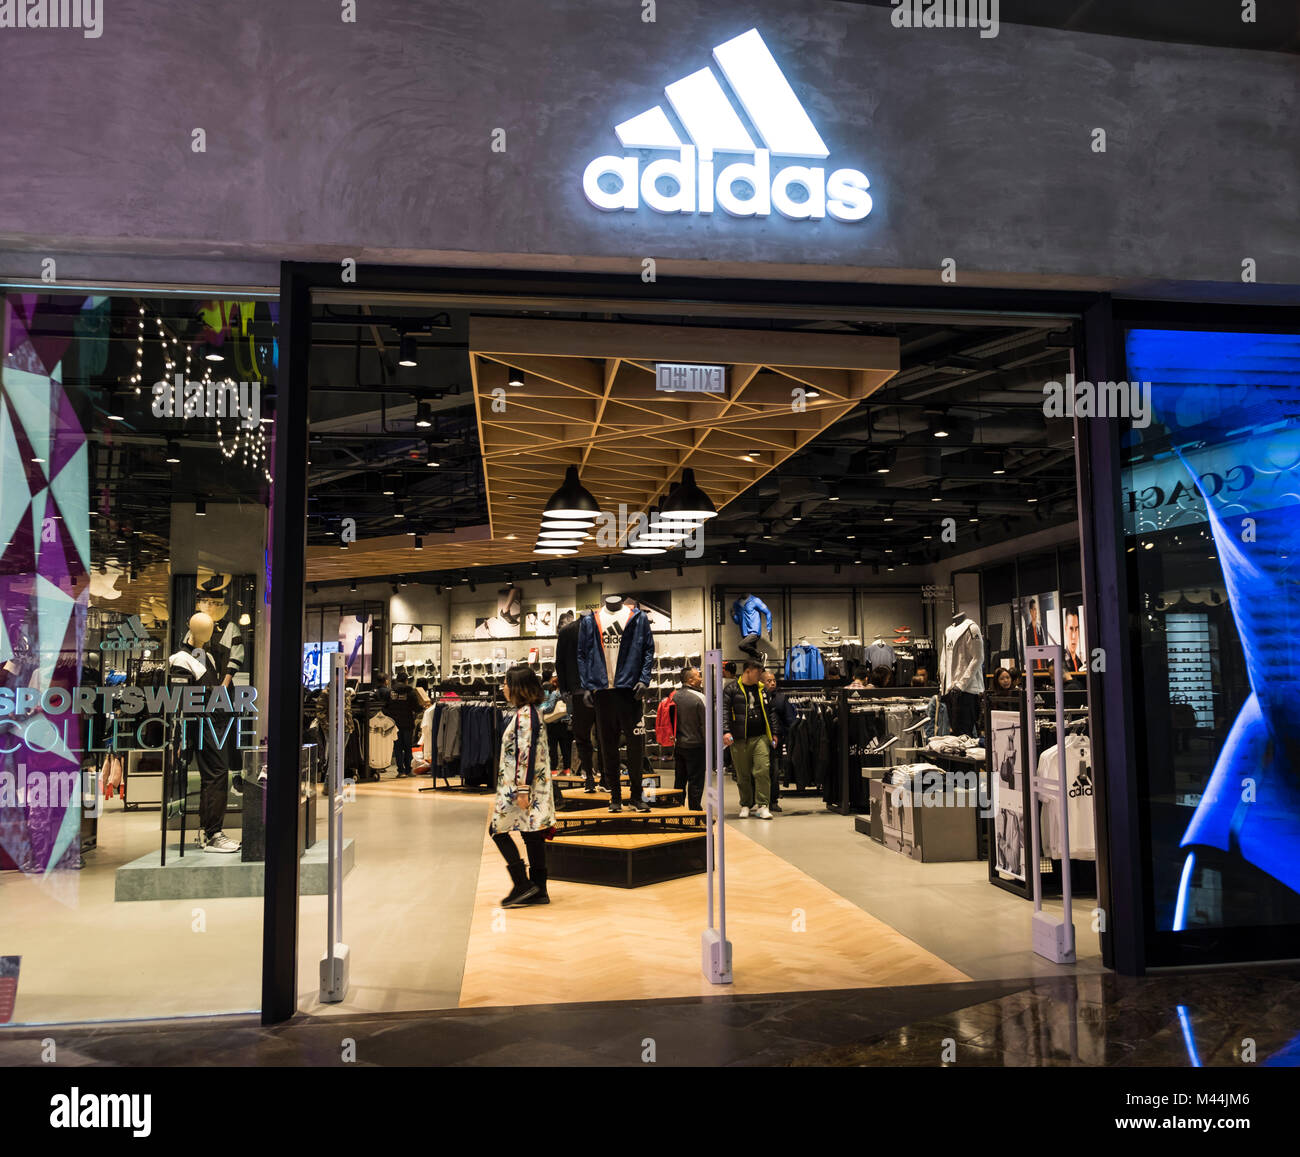 adidas outlet retail crossing